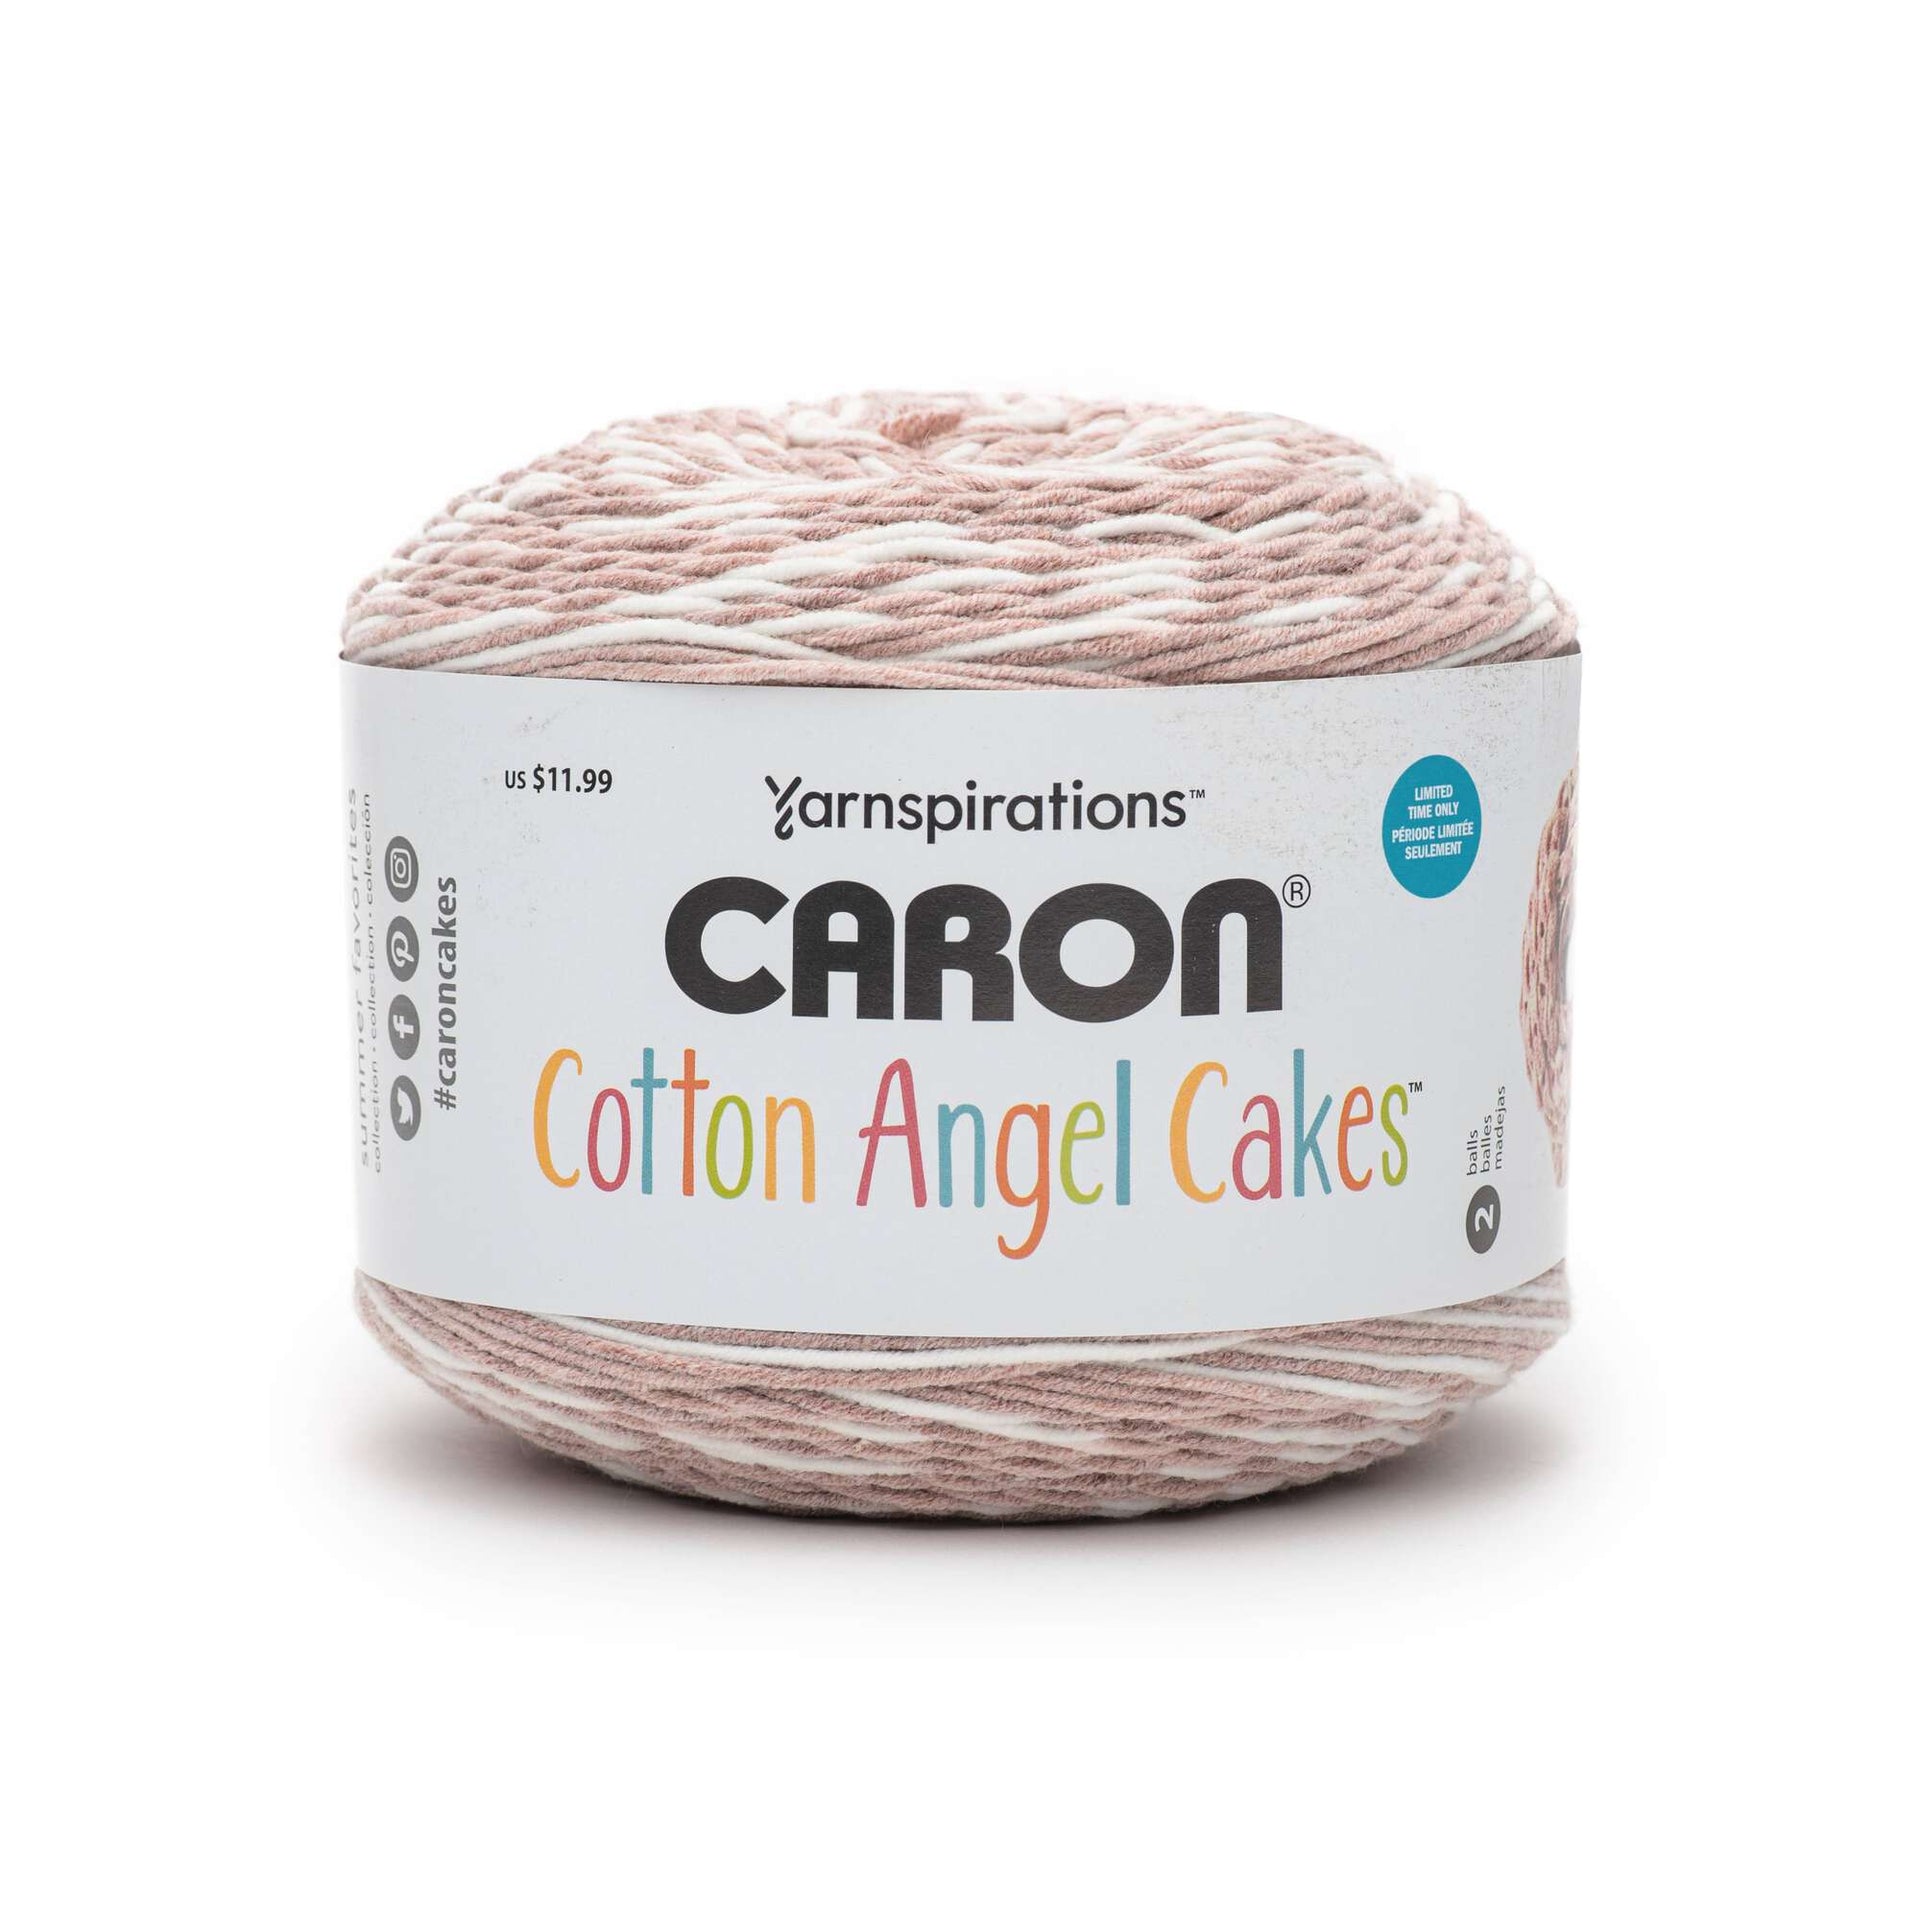 An Early Review of the New Caron COTTON Cakes!